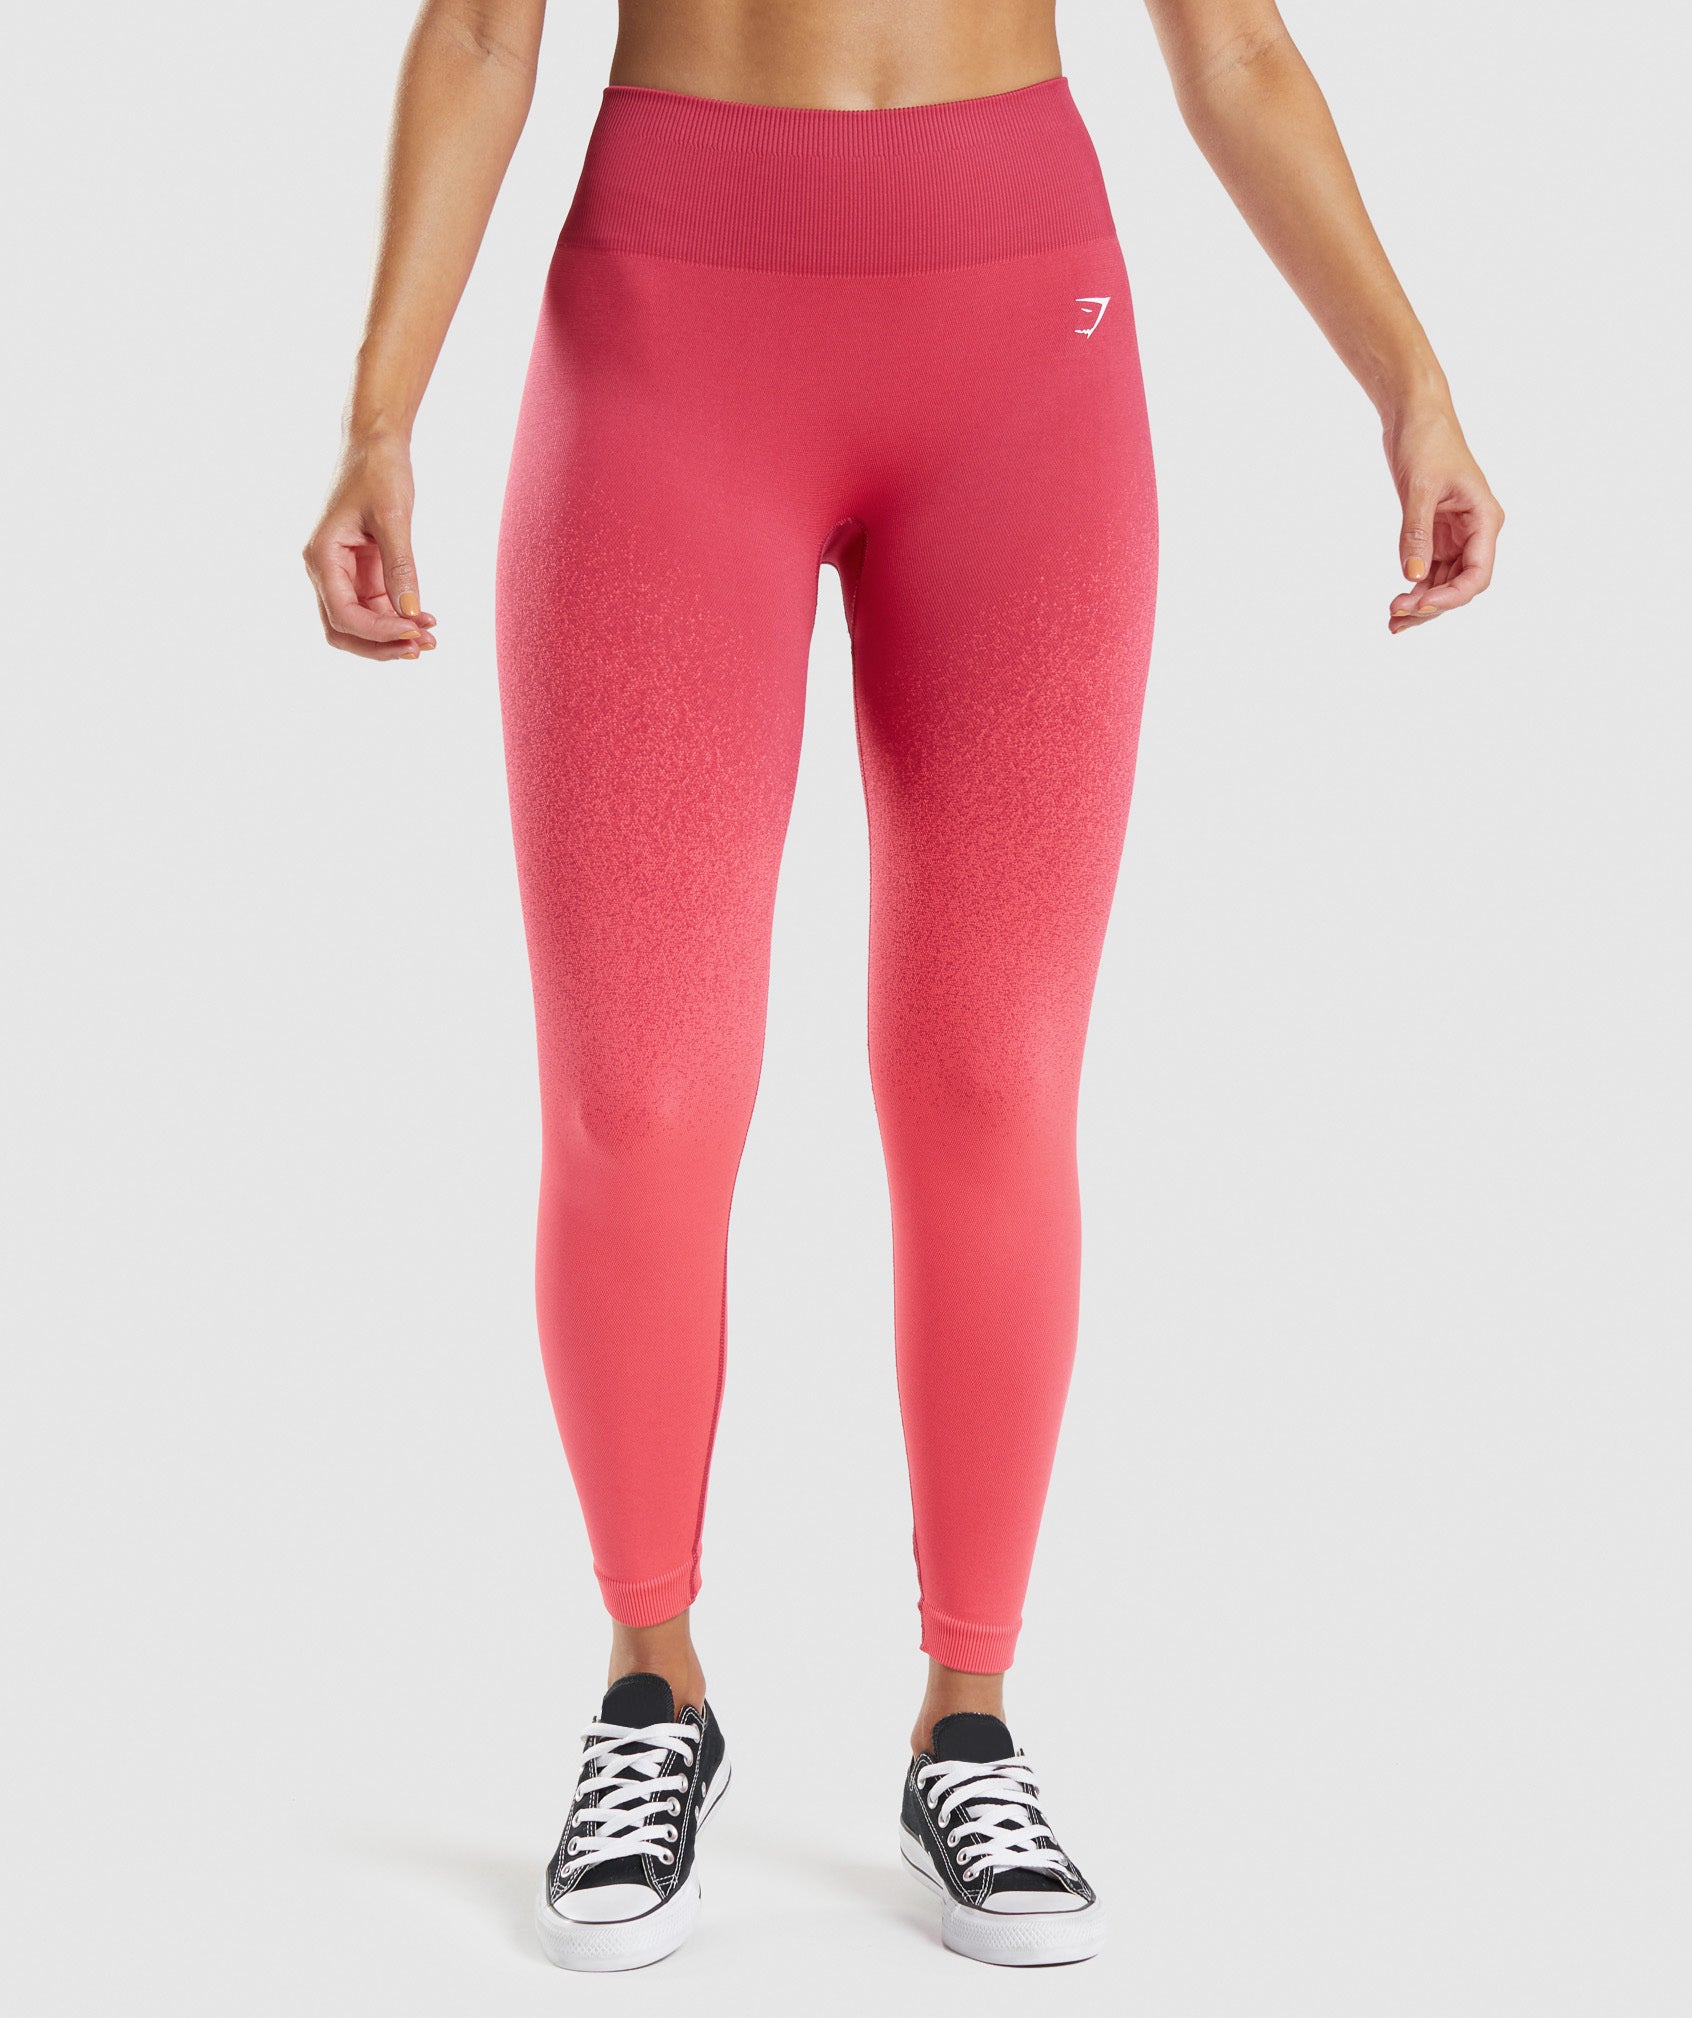 Adapt Ombre Seamless Leggings in Pink/Red